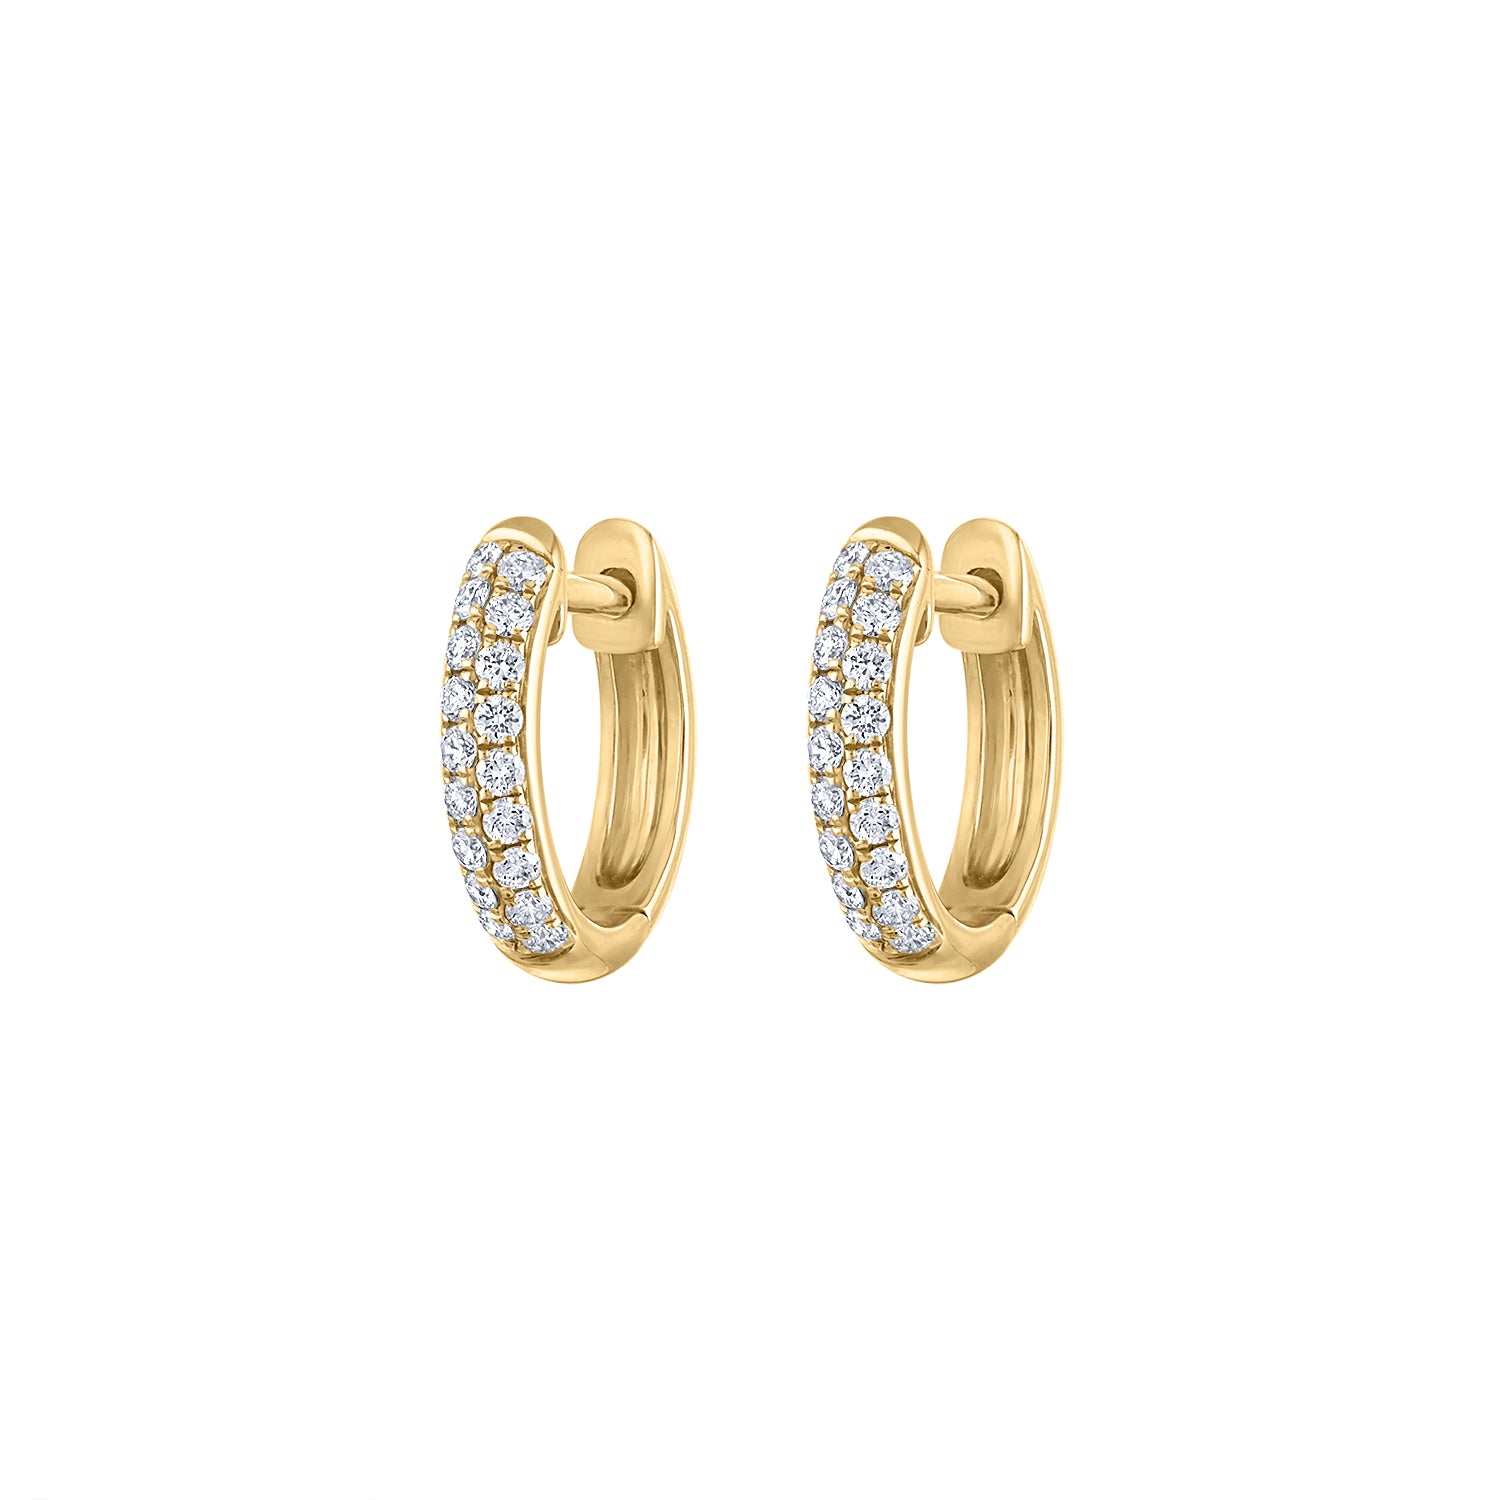 14KT GOLD DIAMOND PAVE SMALL HUGGIE EARRING